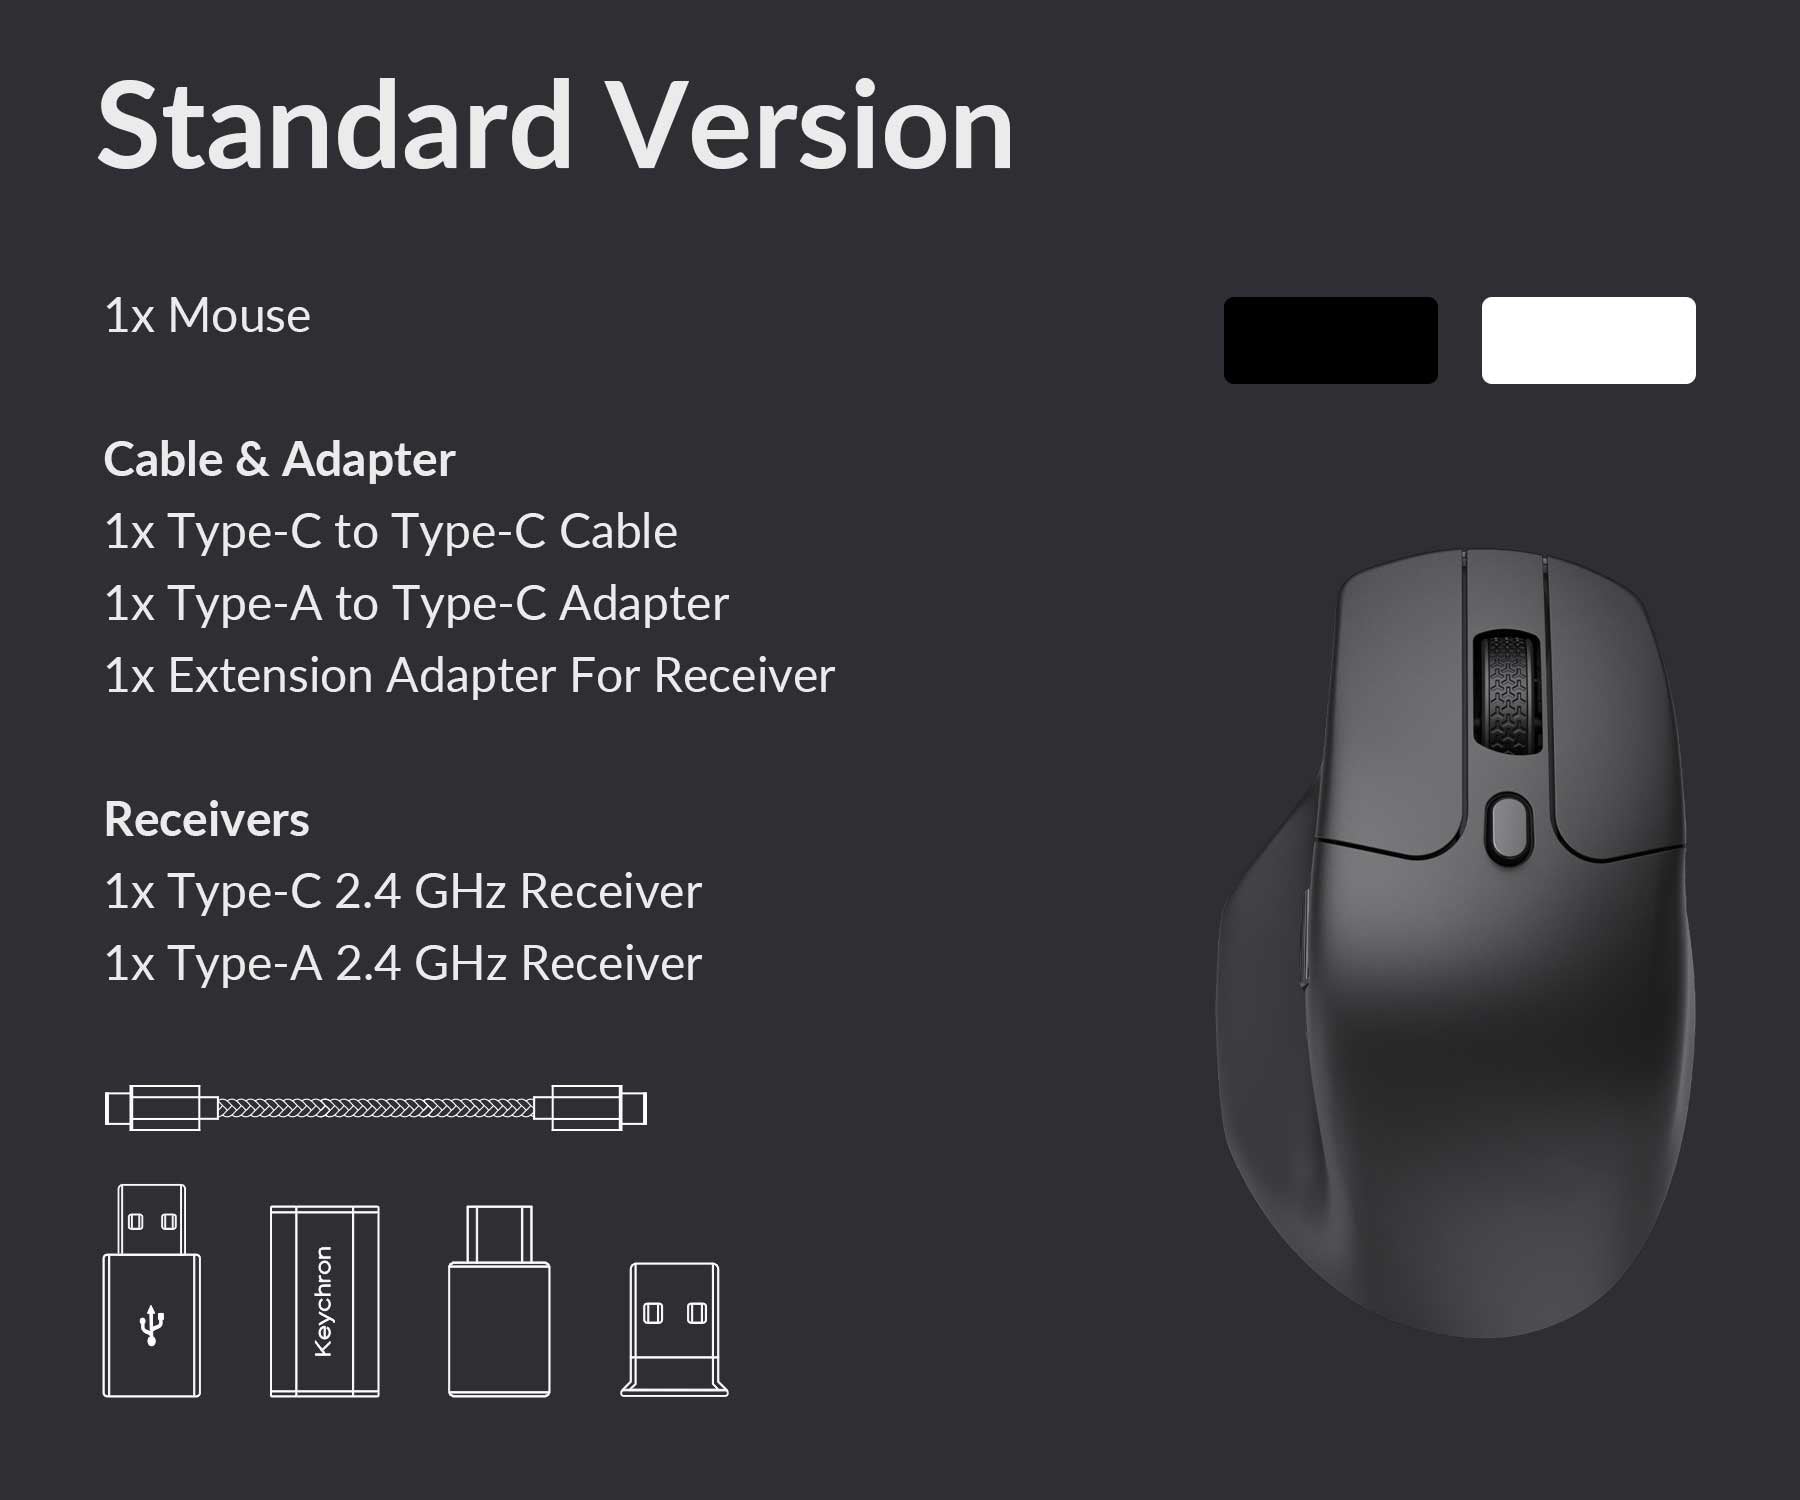 Package list of the Keychron M6 wireless mouse